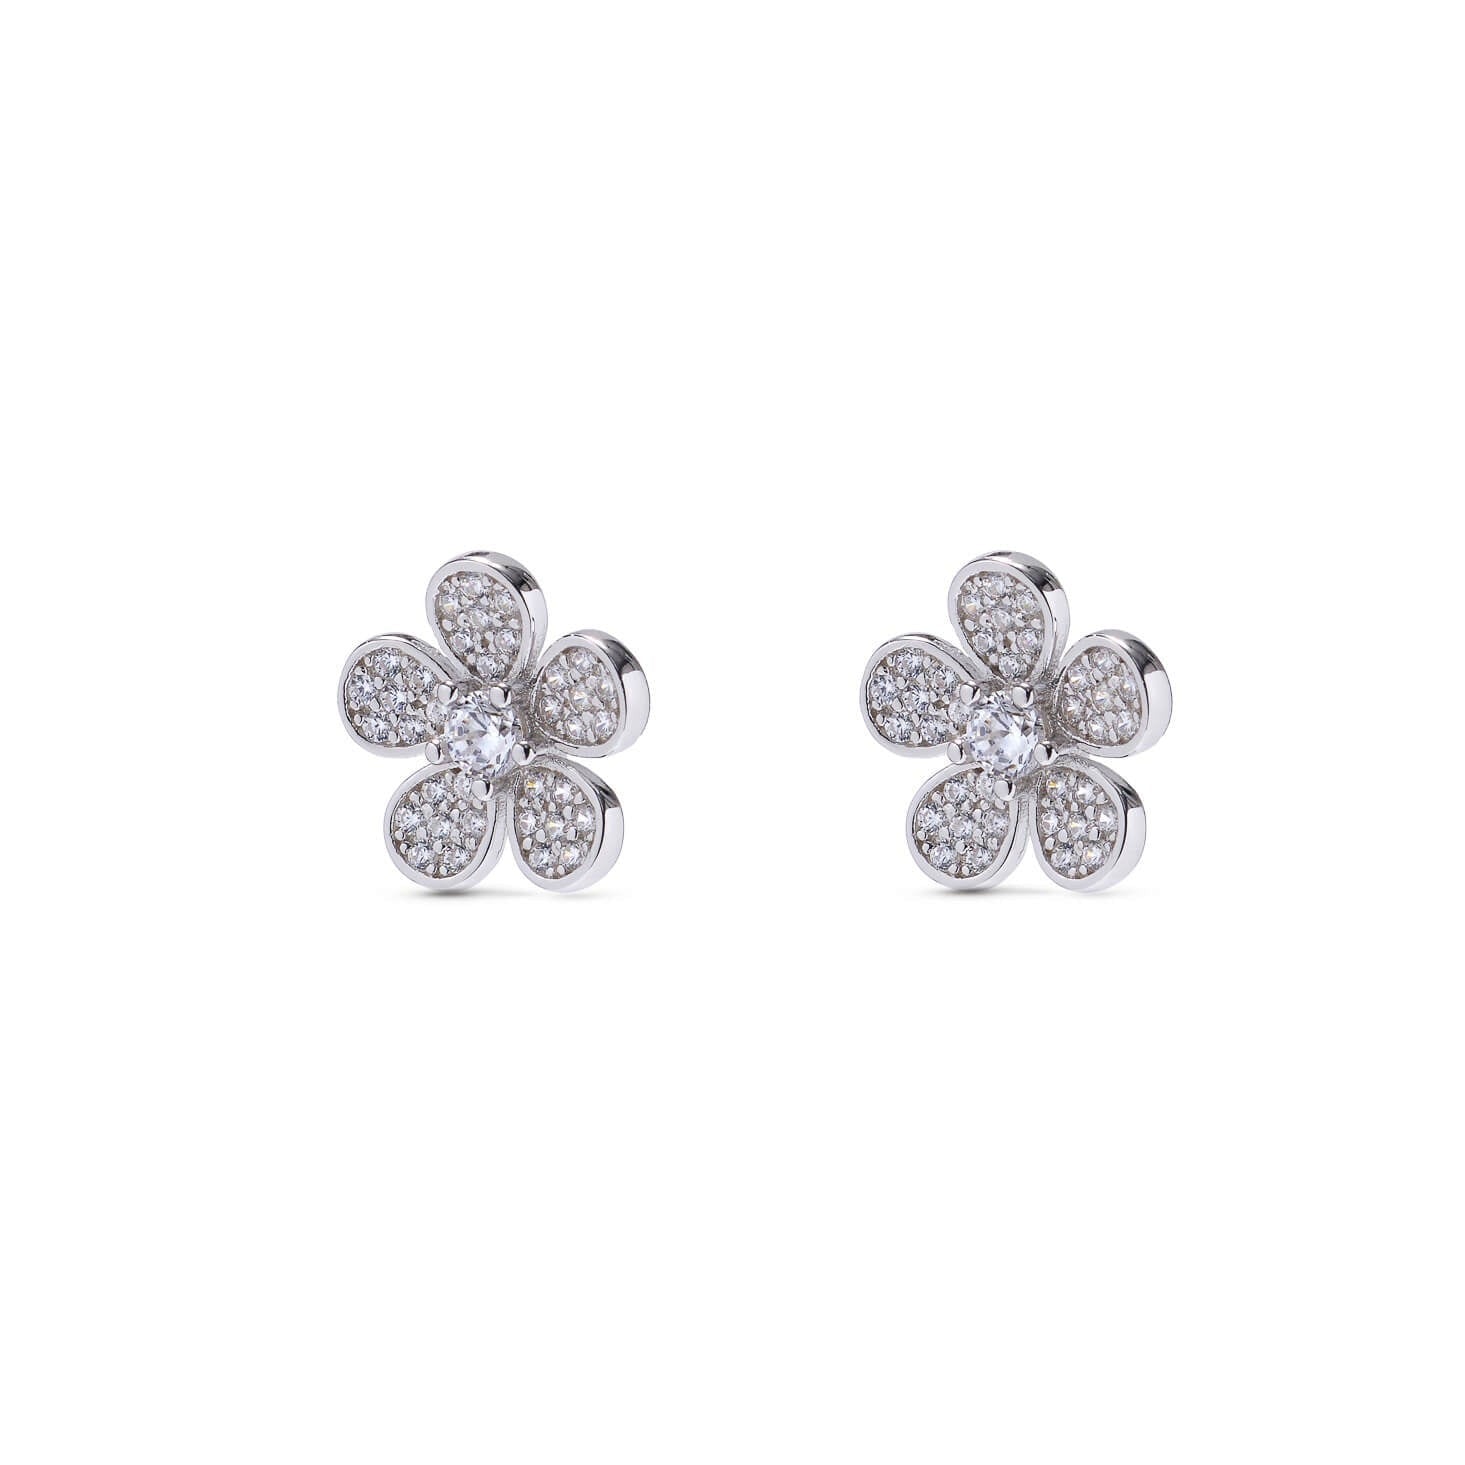 Daisy Silver Stud Earrings with Cubic Zirconia